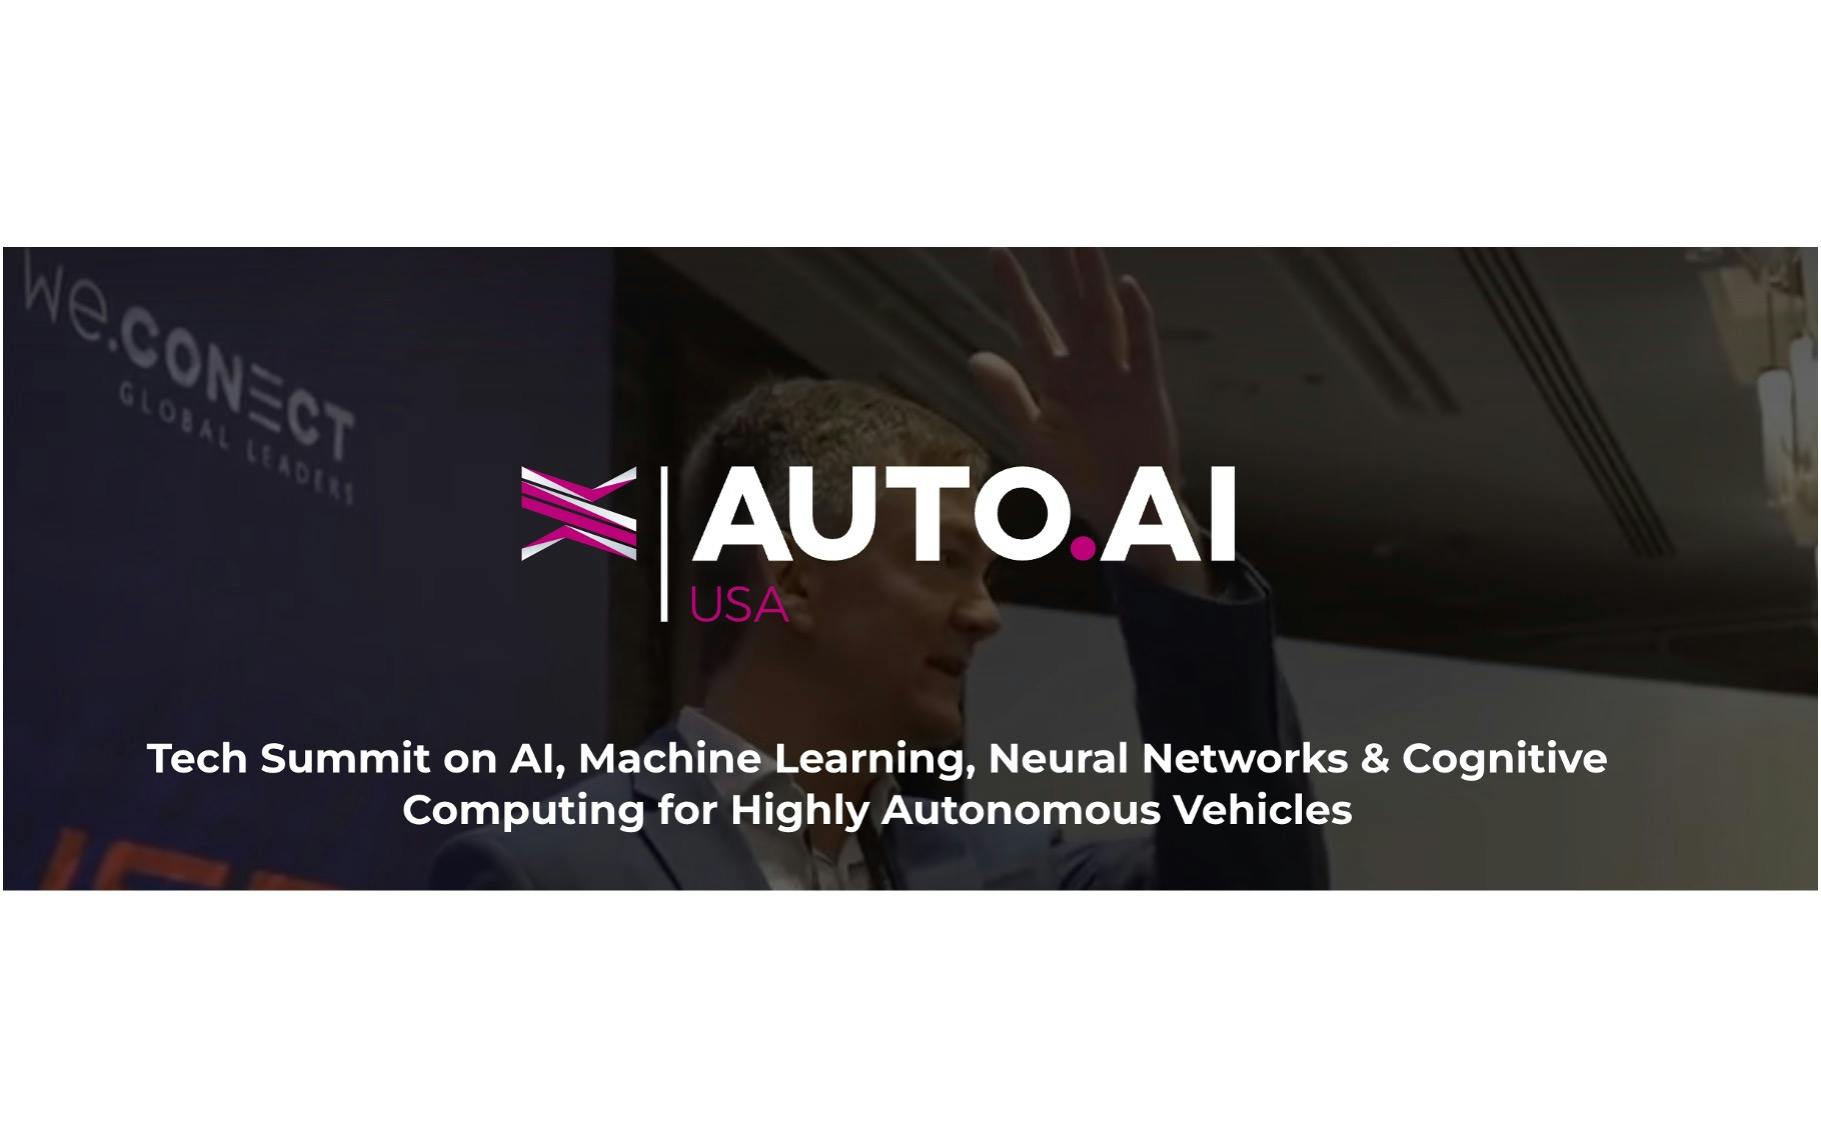 Auto.AI Tech summit on AI, Machine Learning, Neural Networks and Cognitive Computing for Highly Autonomous Vehicles